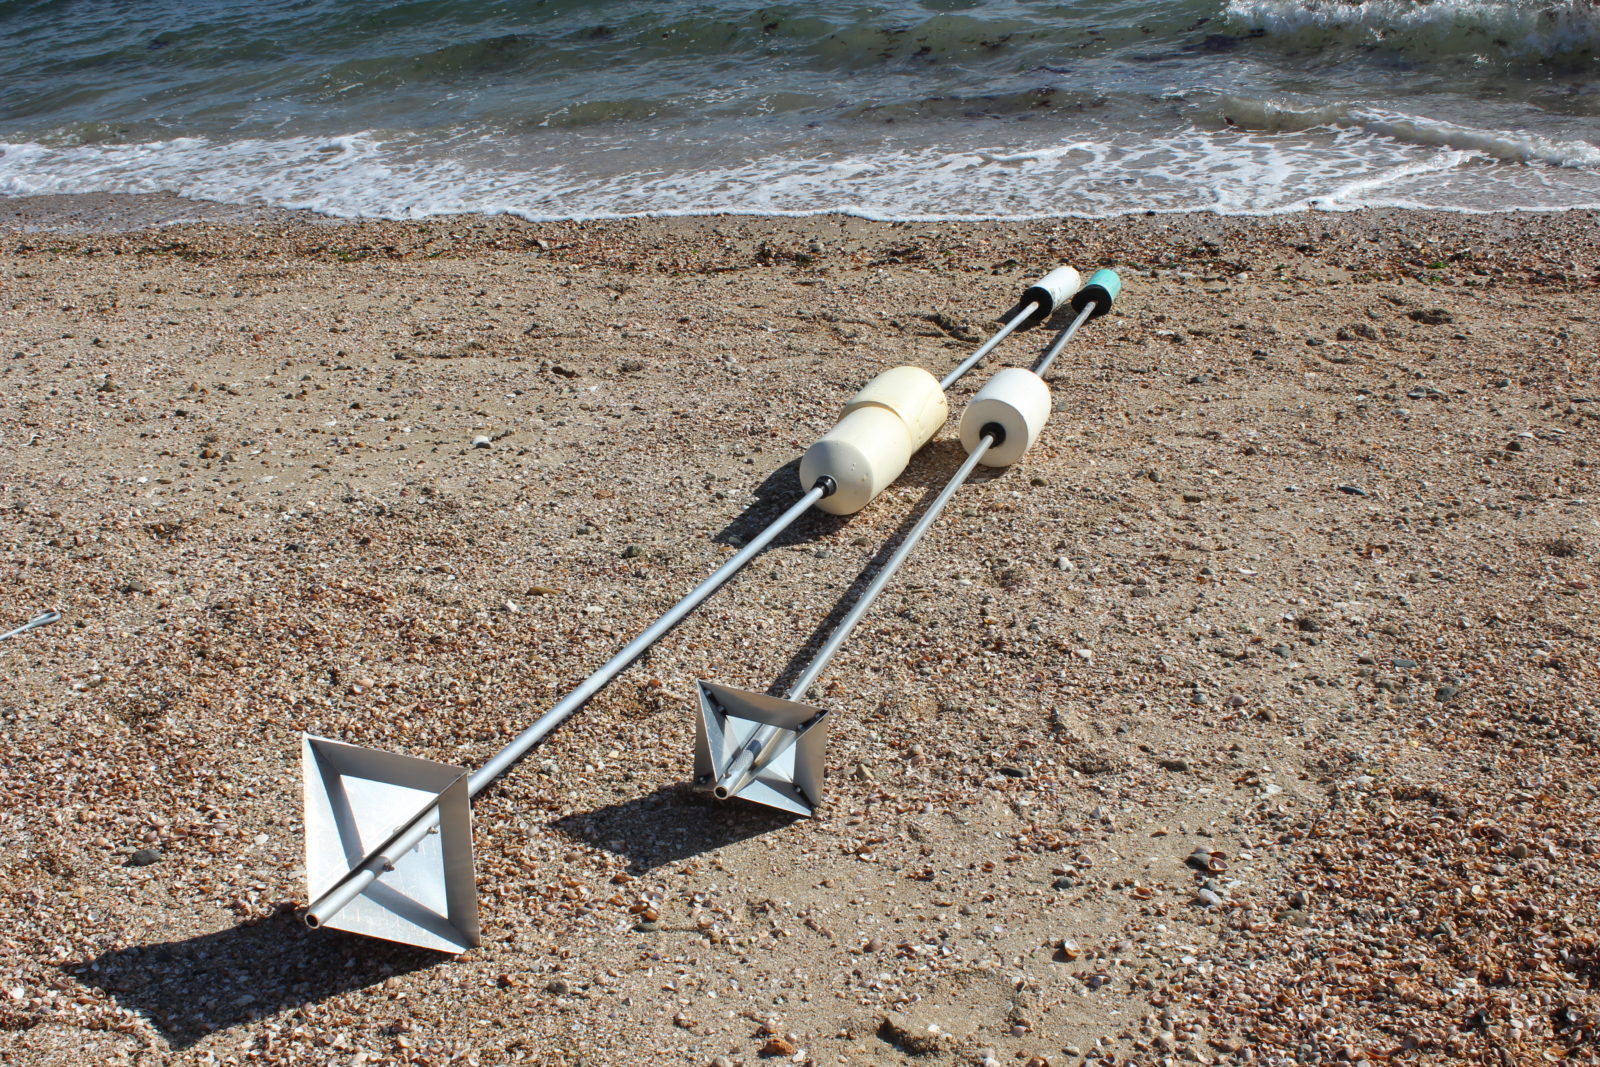 Ideas on making marker buoy more visible - The Hull Truth - Boating and  Fishing Forum